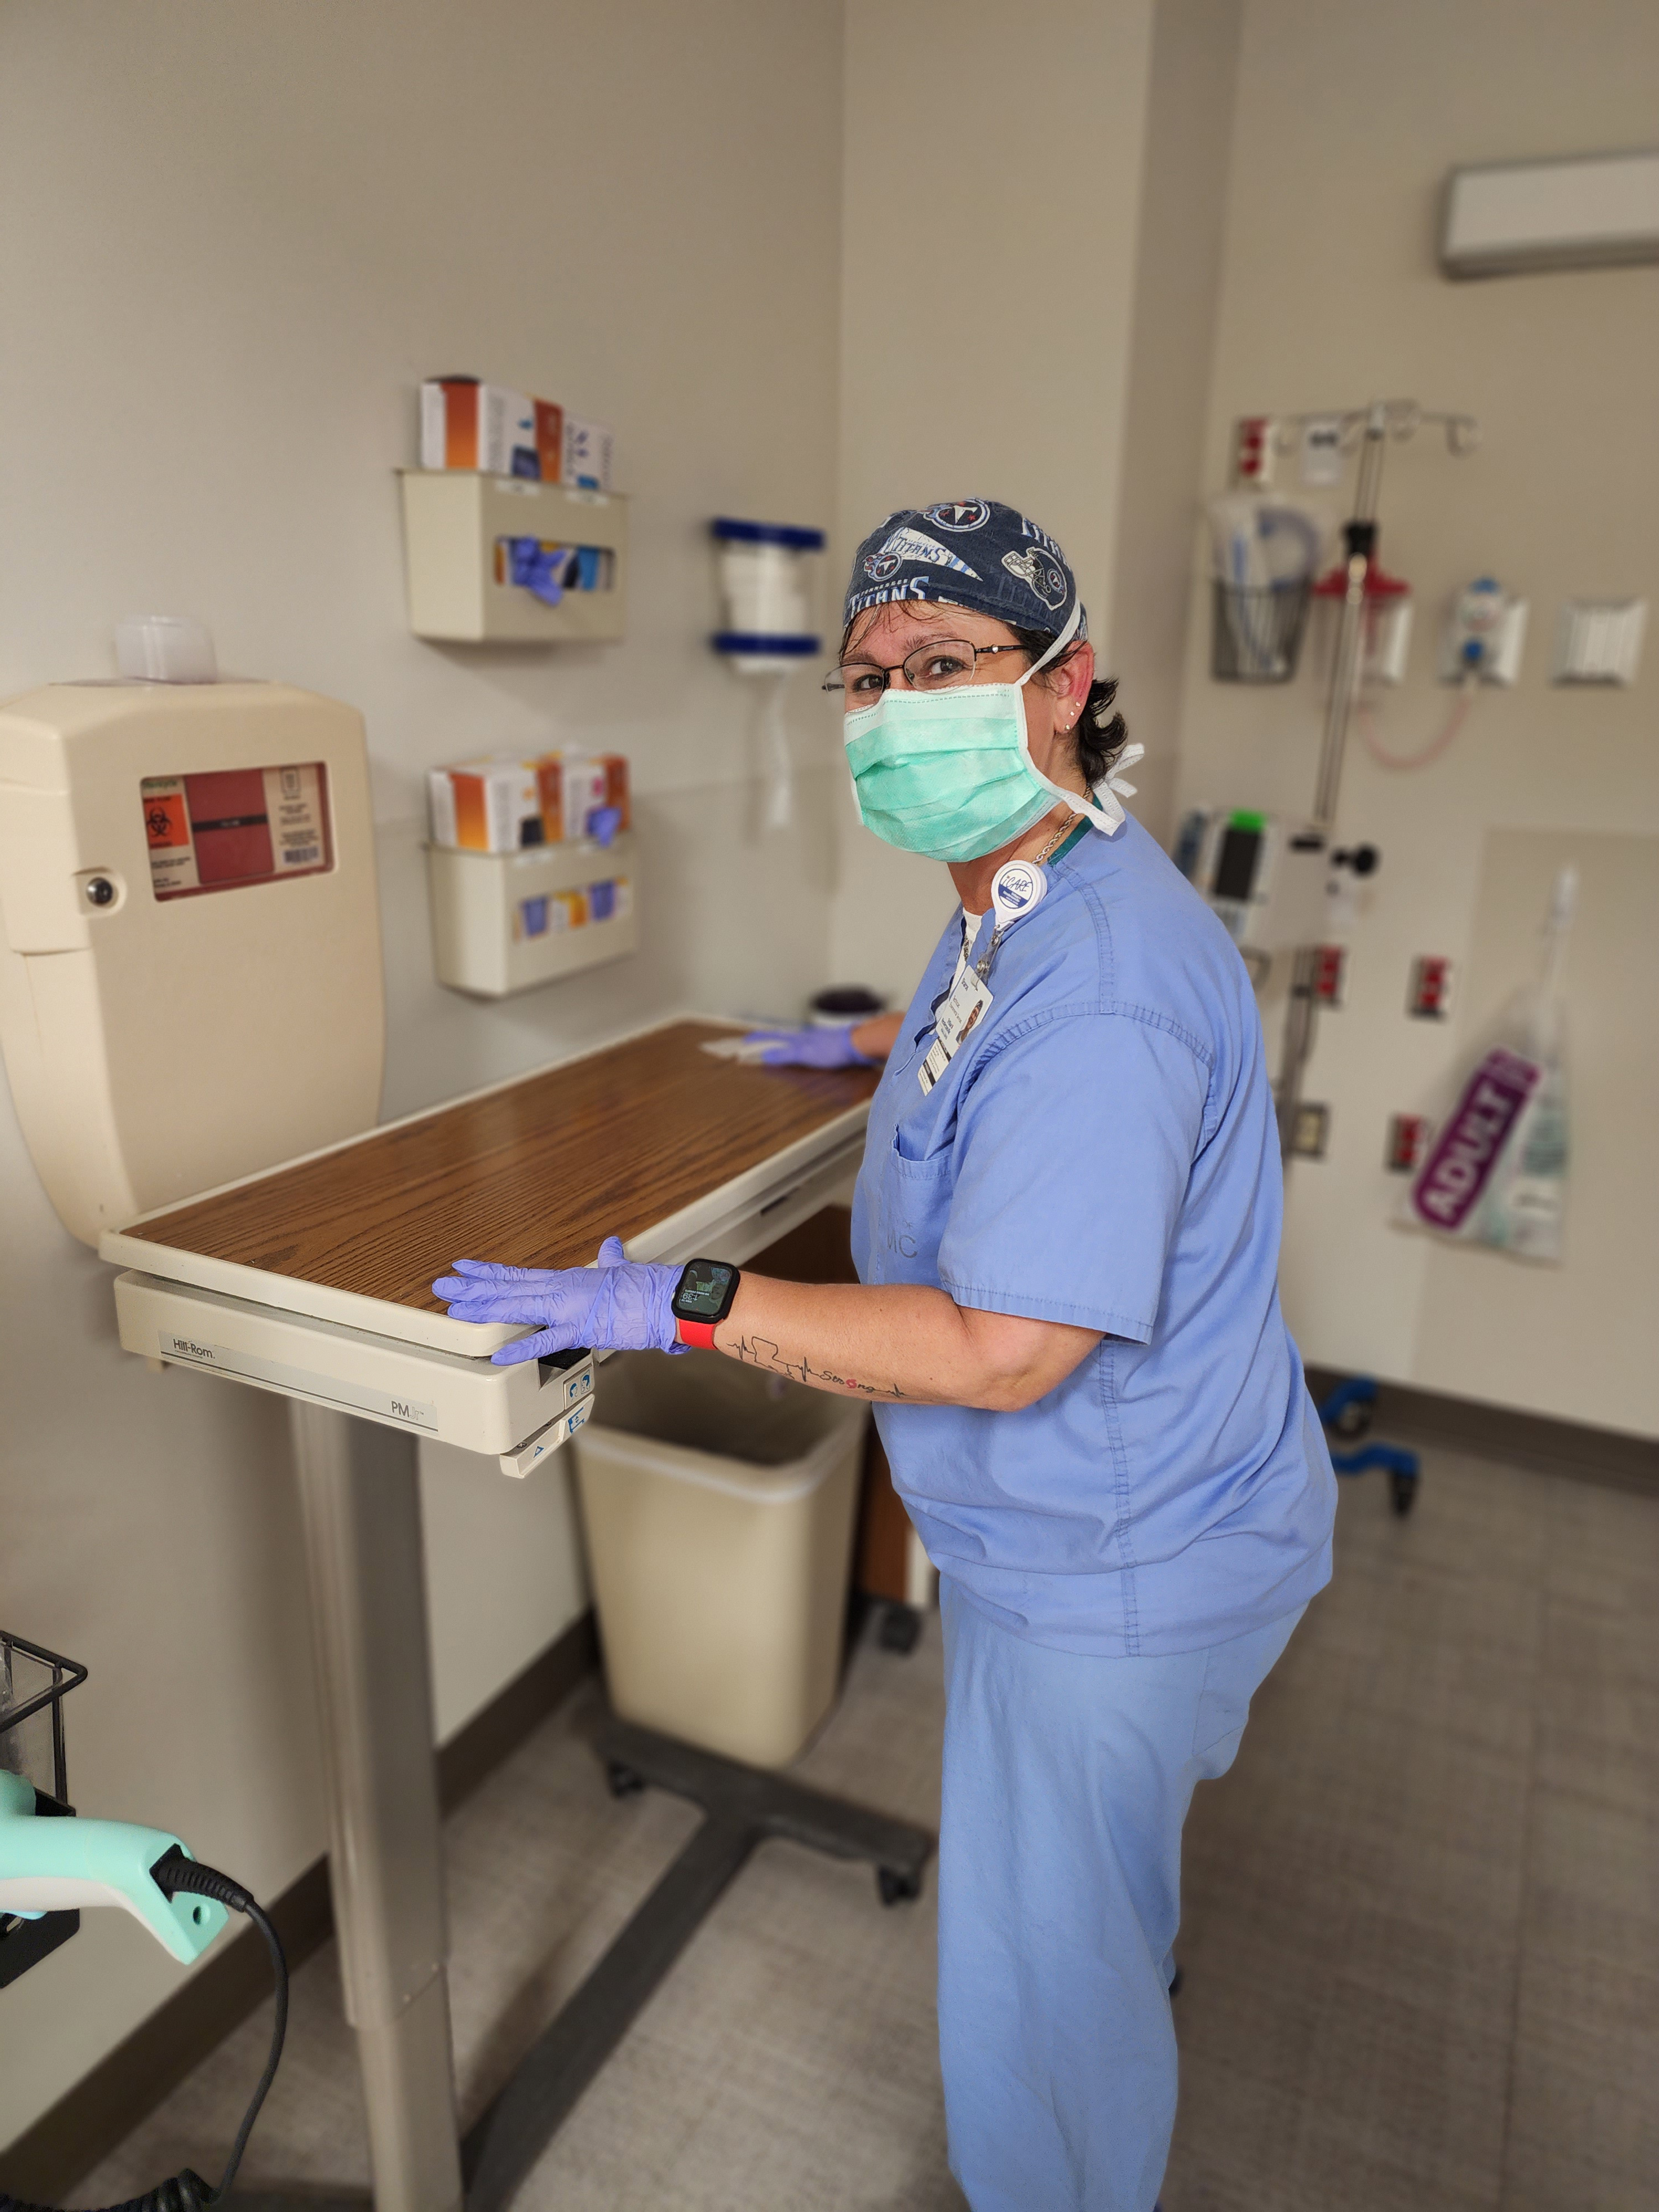 Sharon Hebert, a housekeeper in Environmental Services at TriStar Hendersonville, cleans a room in the PACU (post anesthesia care unit).